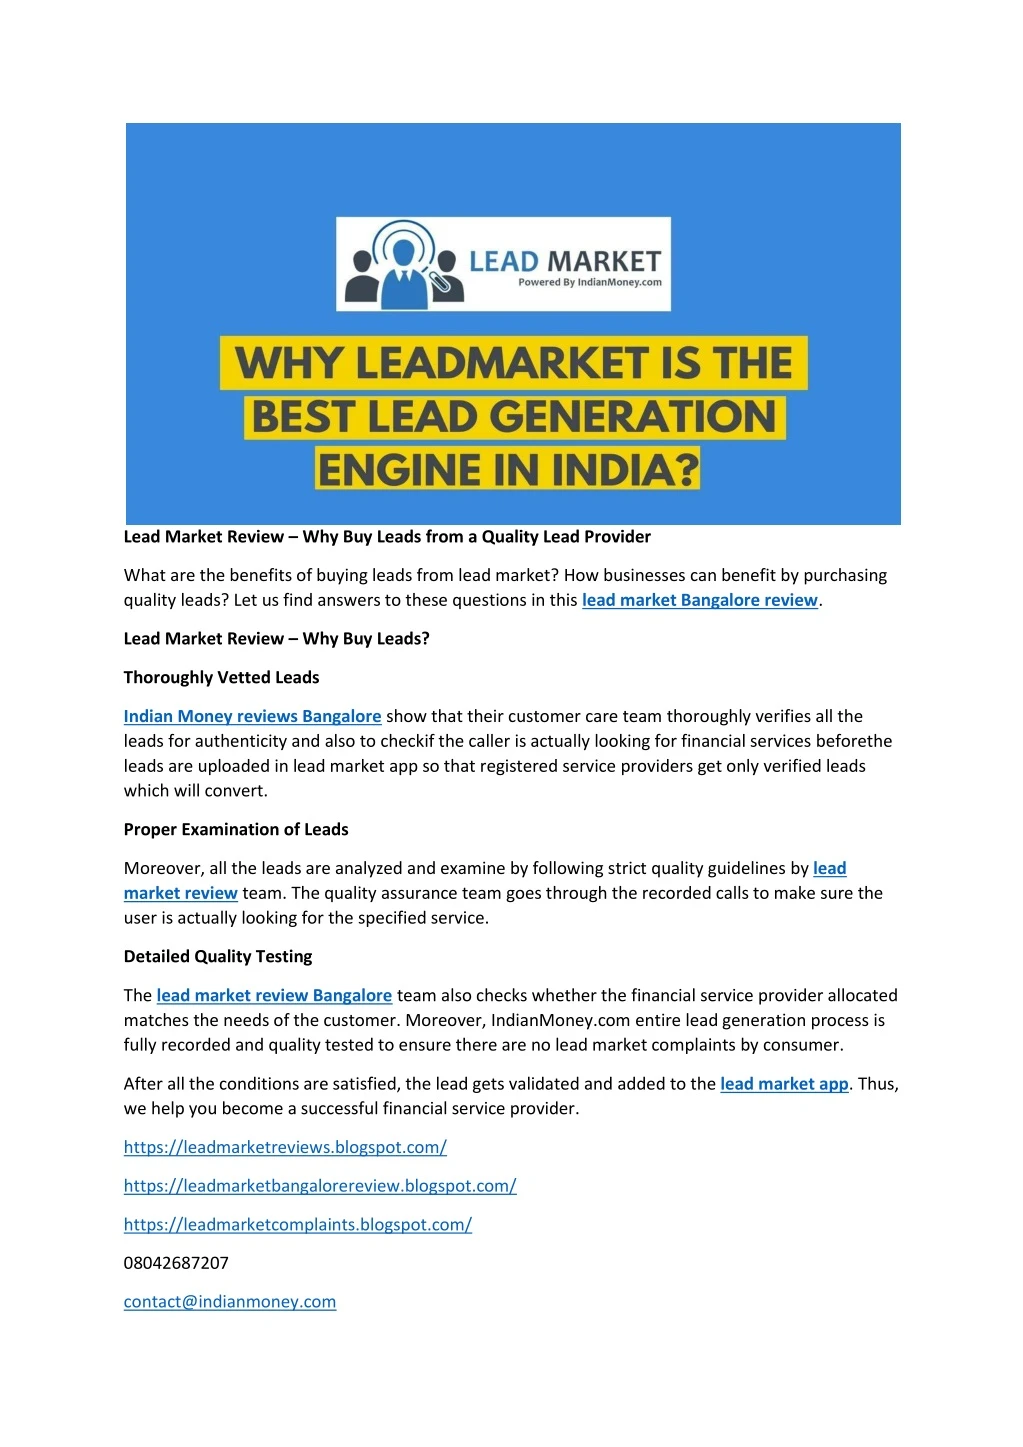 lead market review why buy leads from a quality